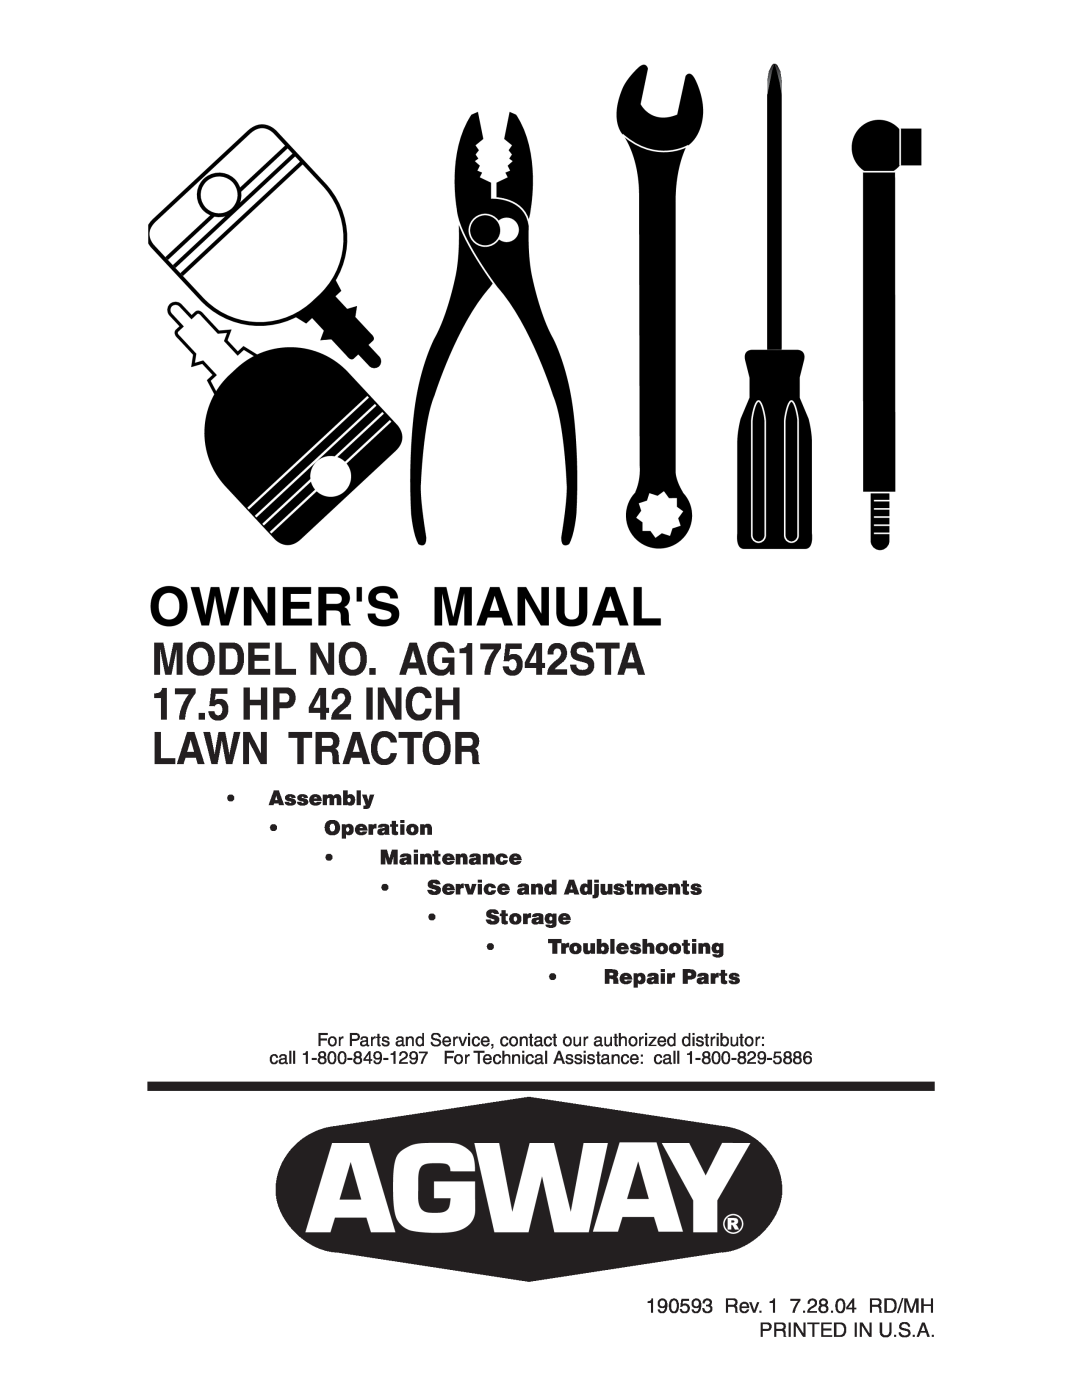 Electrolux manual MODEL NO. AG17542STA, 17.5 HP 42 INCH LAWN TRACTOR, Troubleshooting Repair Parts 